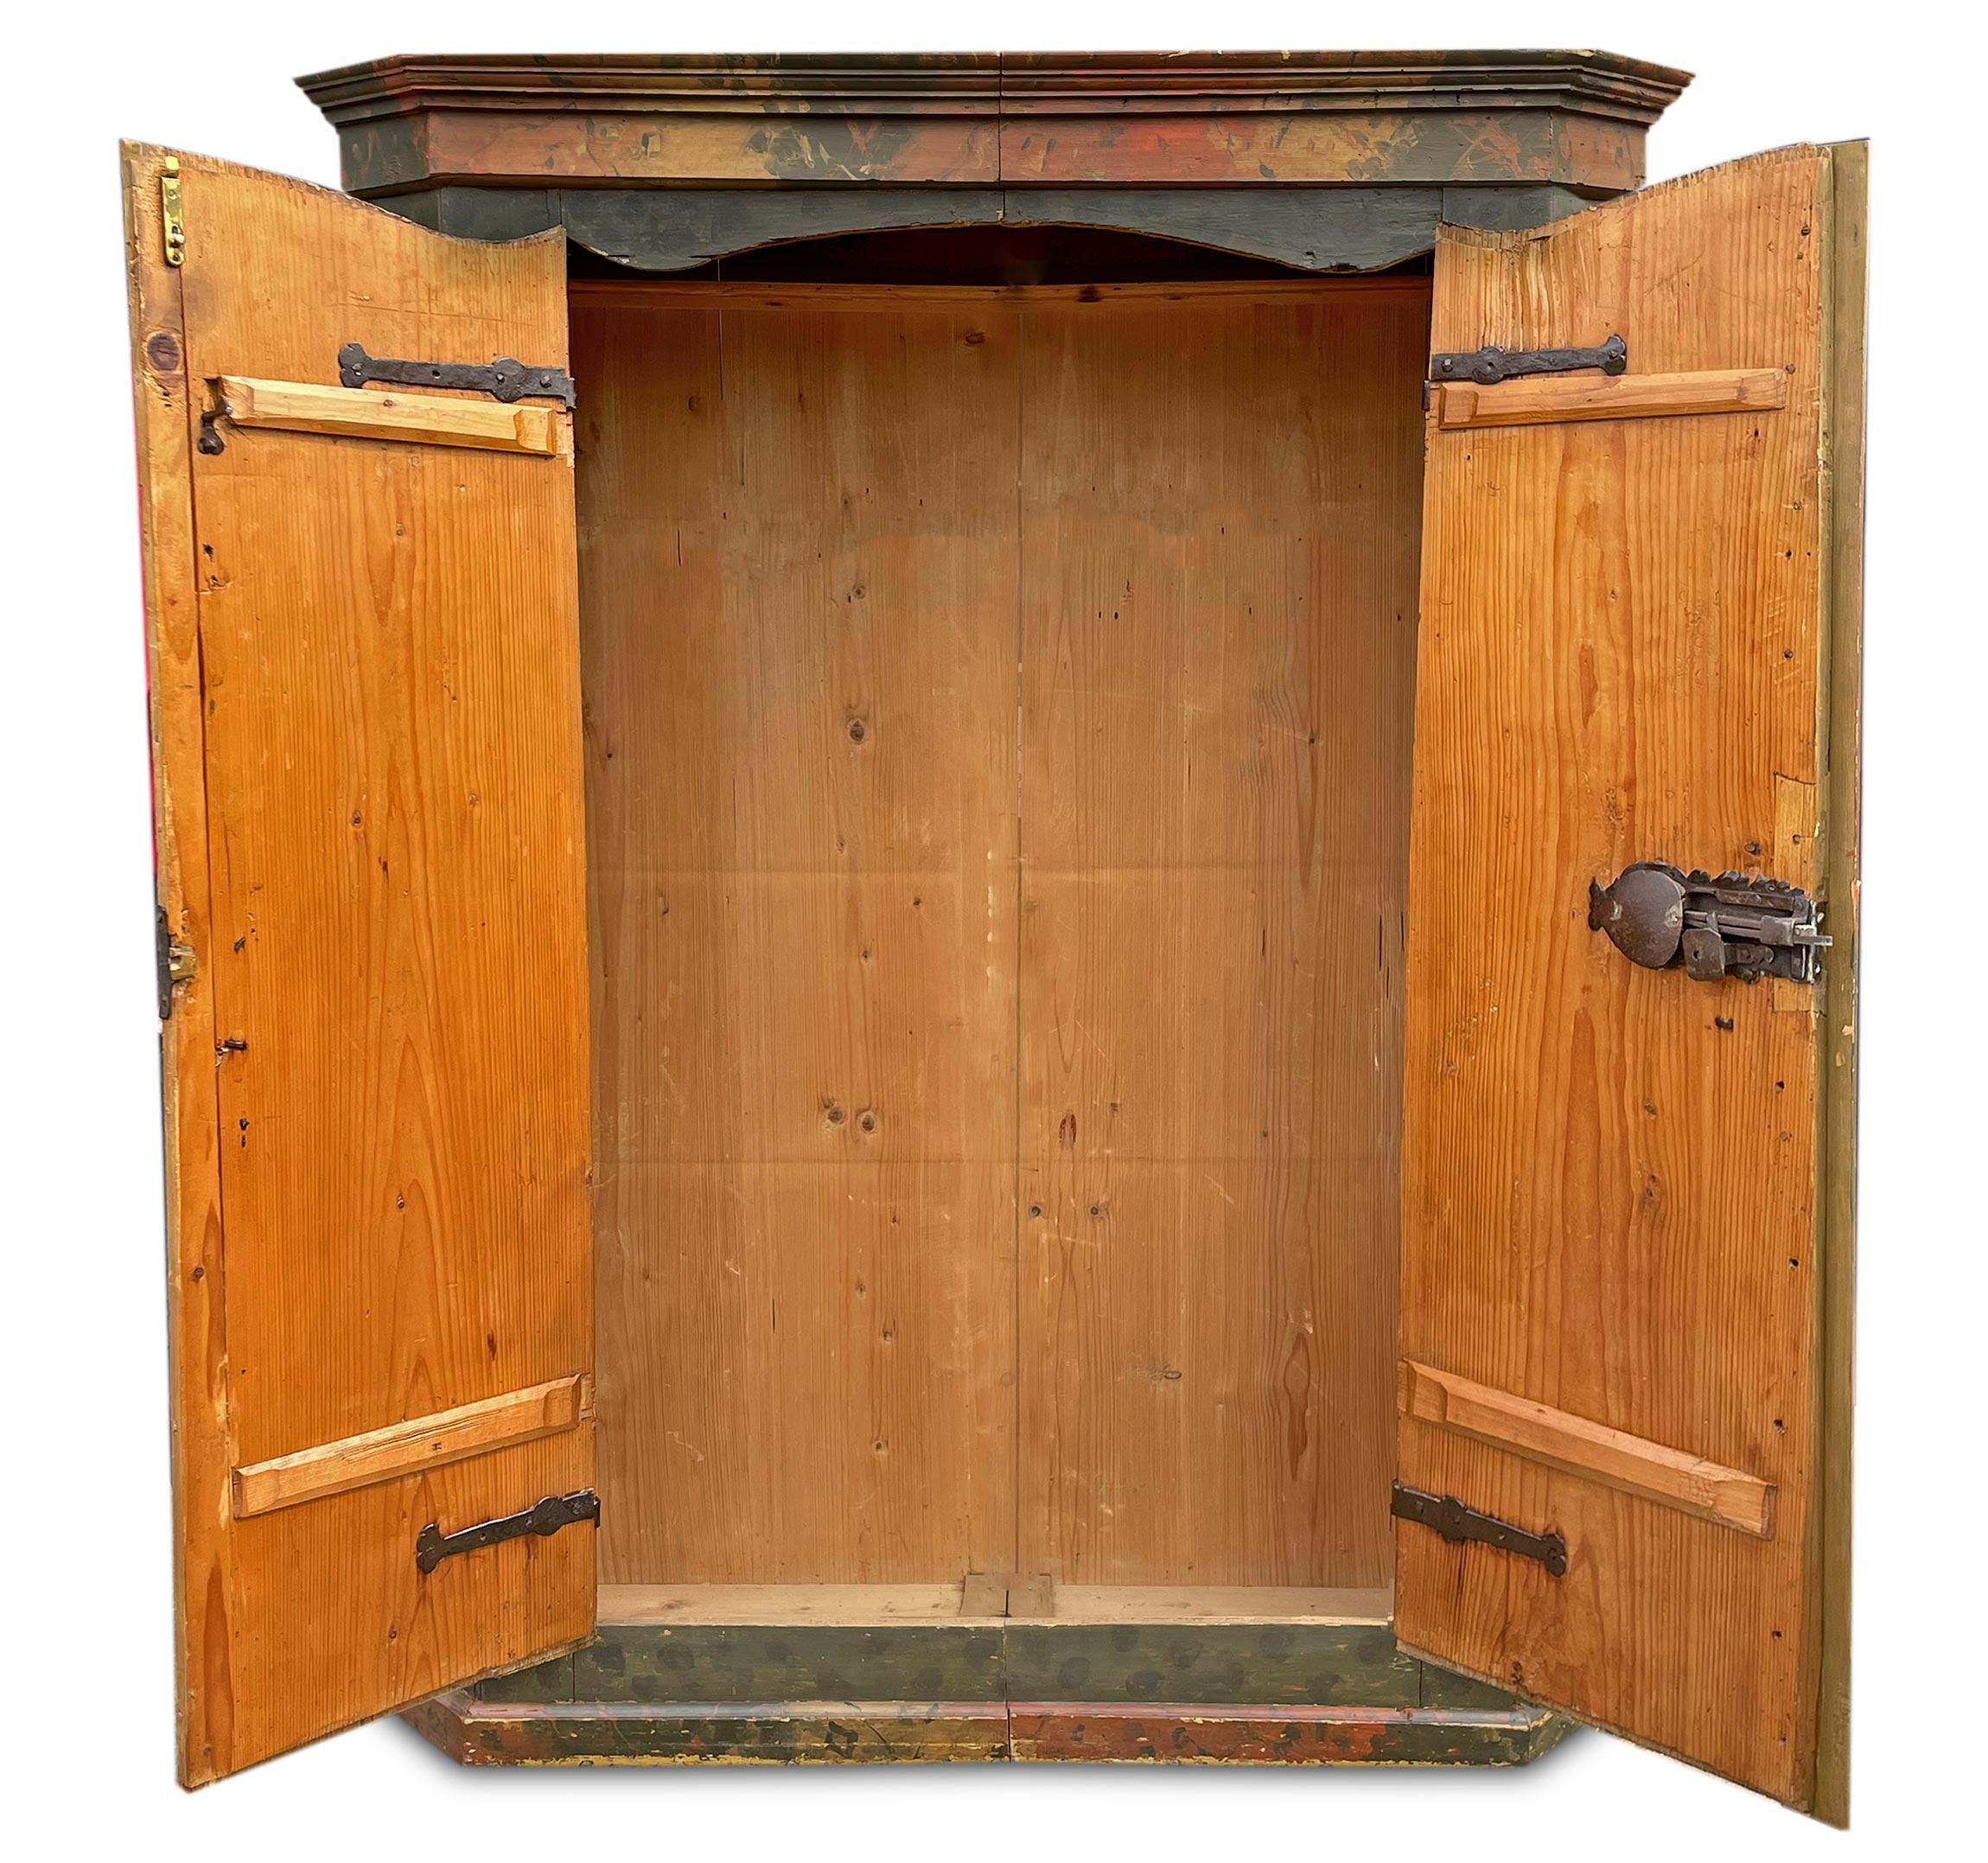 Green Floral Painted Wardrobe Dated 1776

Measurements: H.165 cm – W.130 cm (142 at the frames) – D.42 cm (50 at the frames)
Essence: Fir
Period: 1776
Origin: Tyrol

Tyrolean wardrobe, with two doors, entirely painted in petrol green. On the doors,